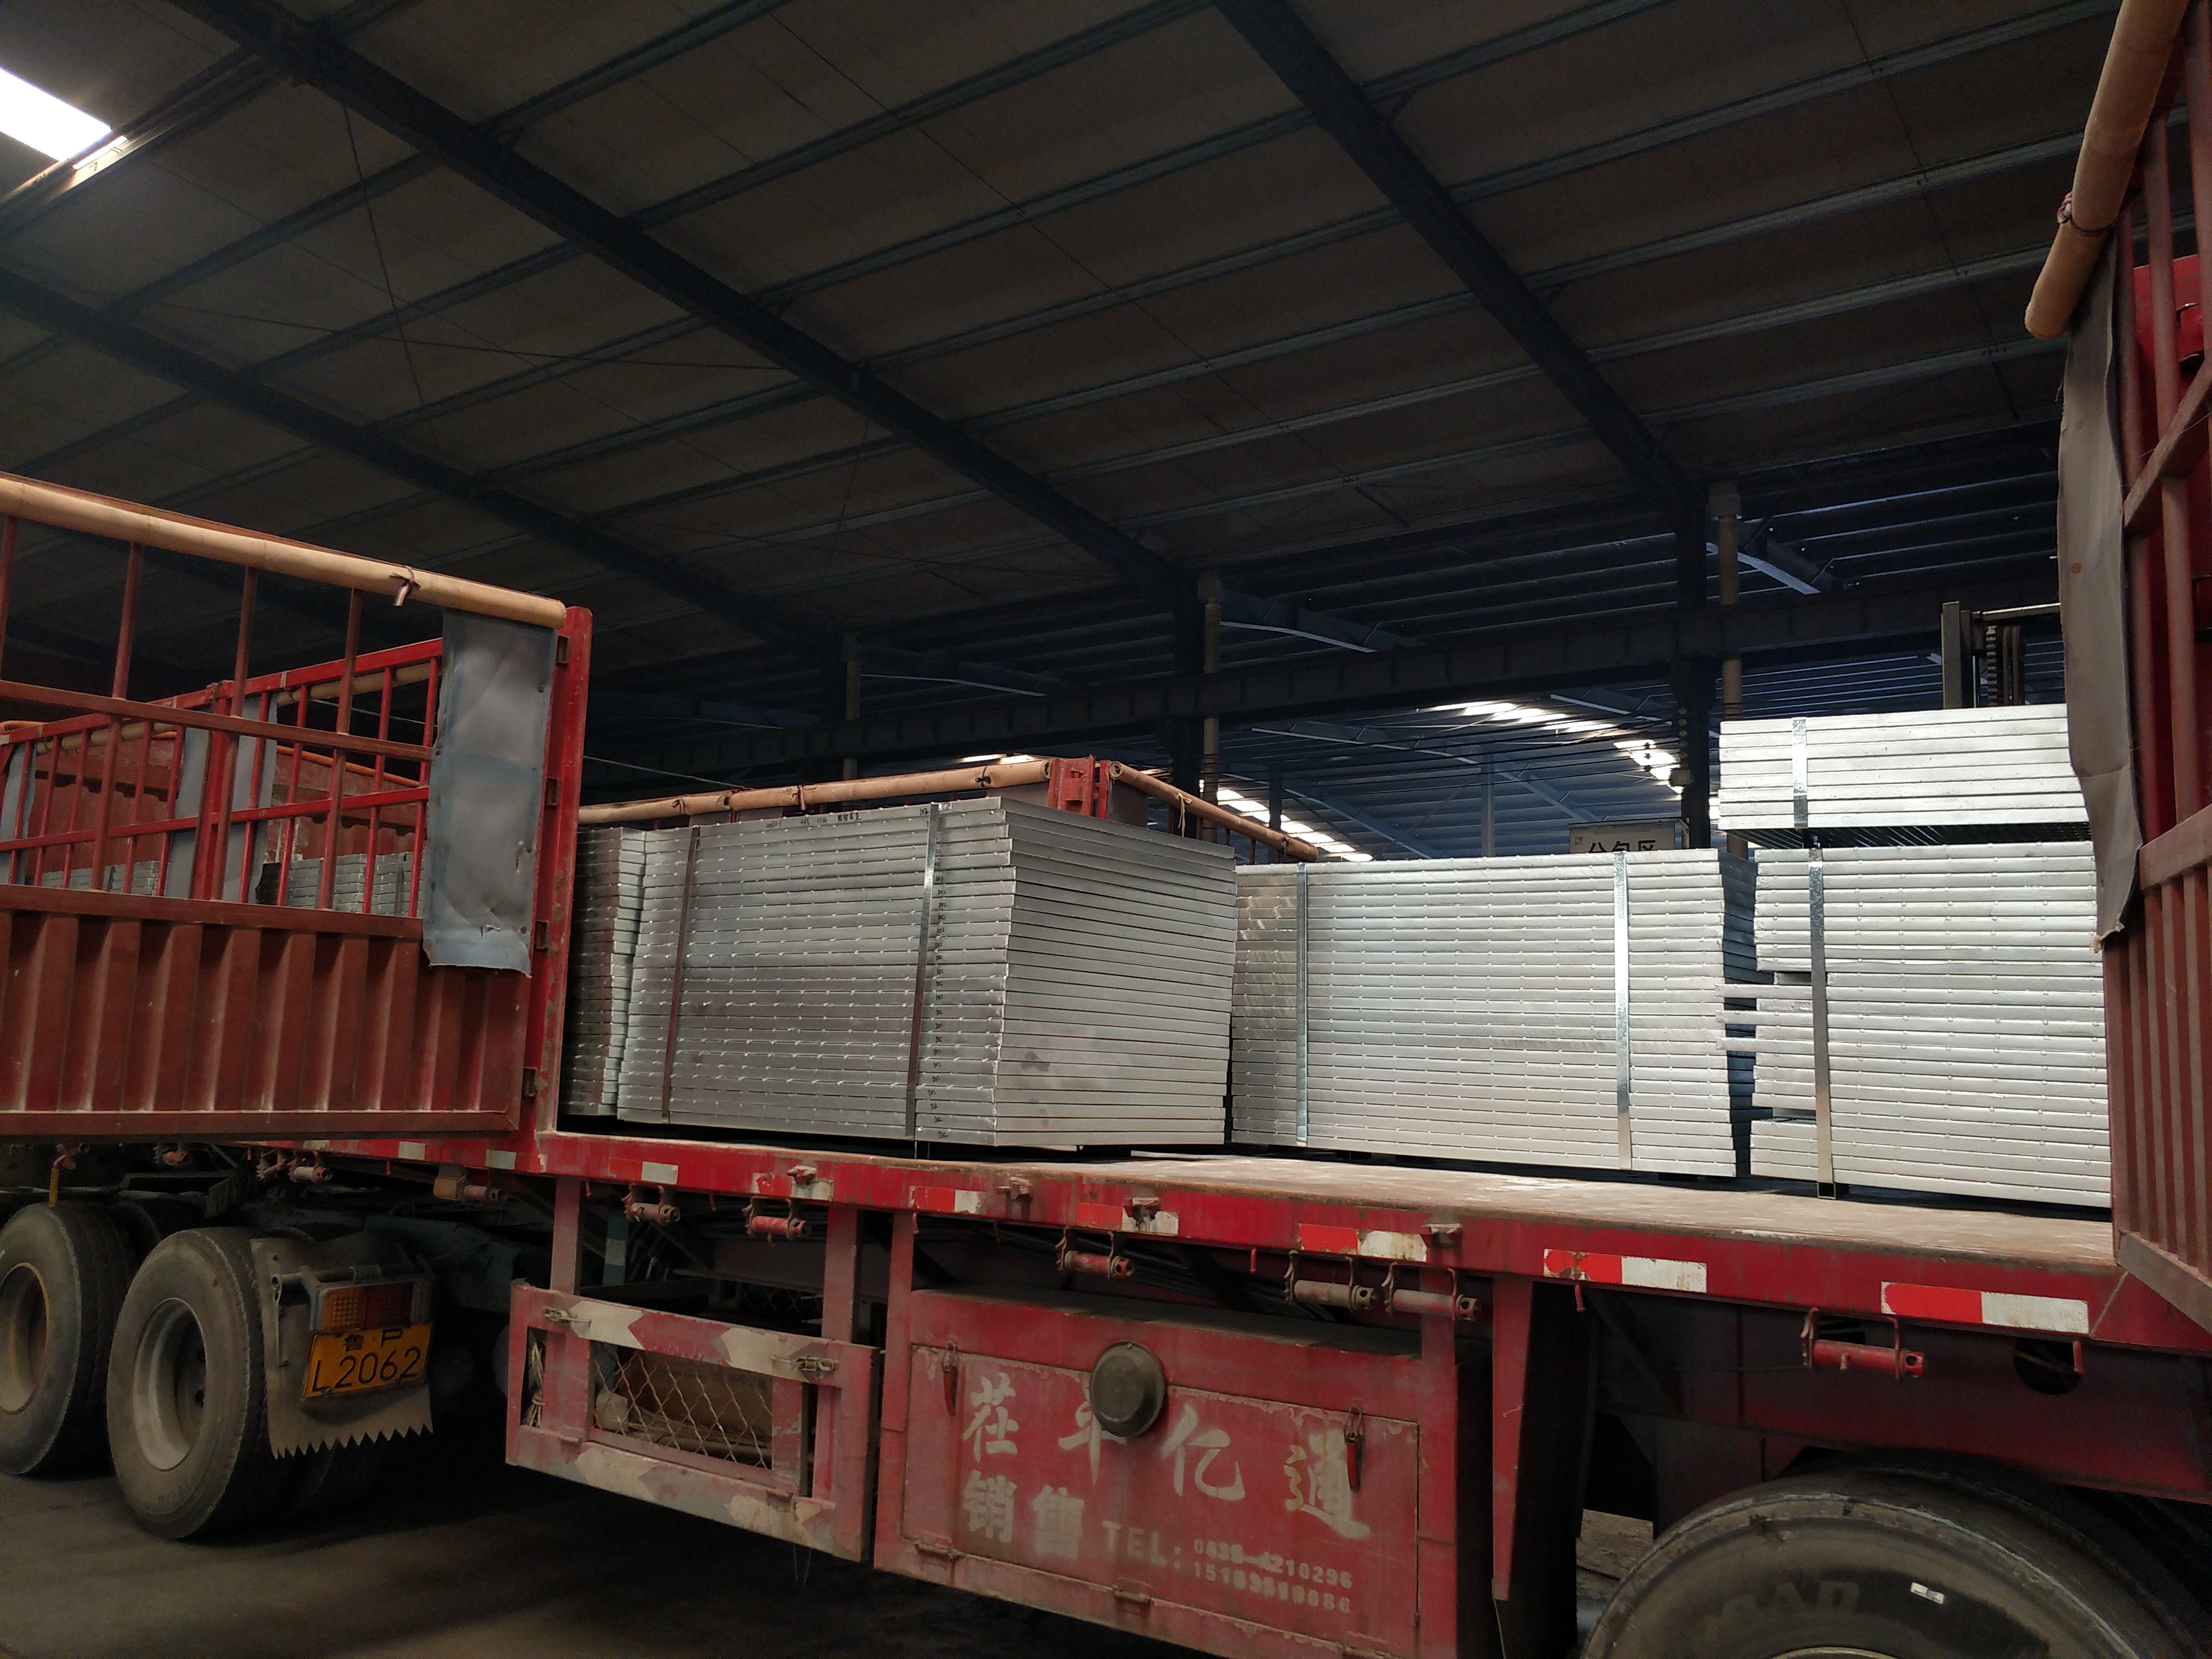 Shipment: 20 Metric ton of galvanised steel grating ready for loading and supply for local project in China